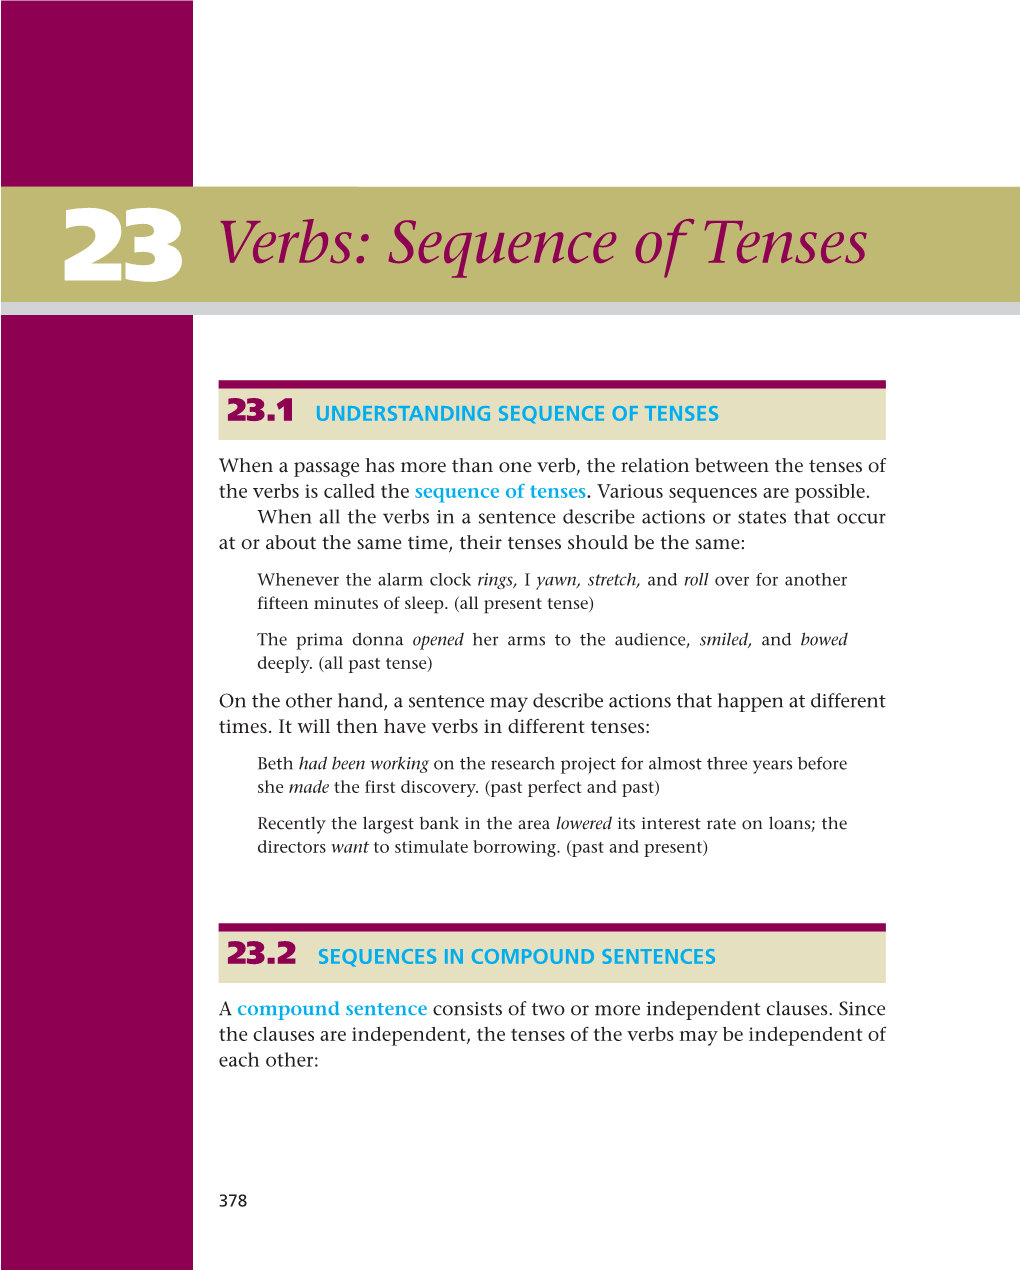 Verbs: Sequence of Tenses